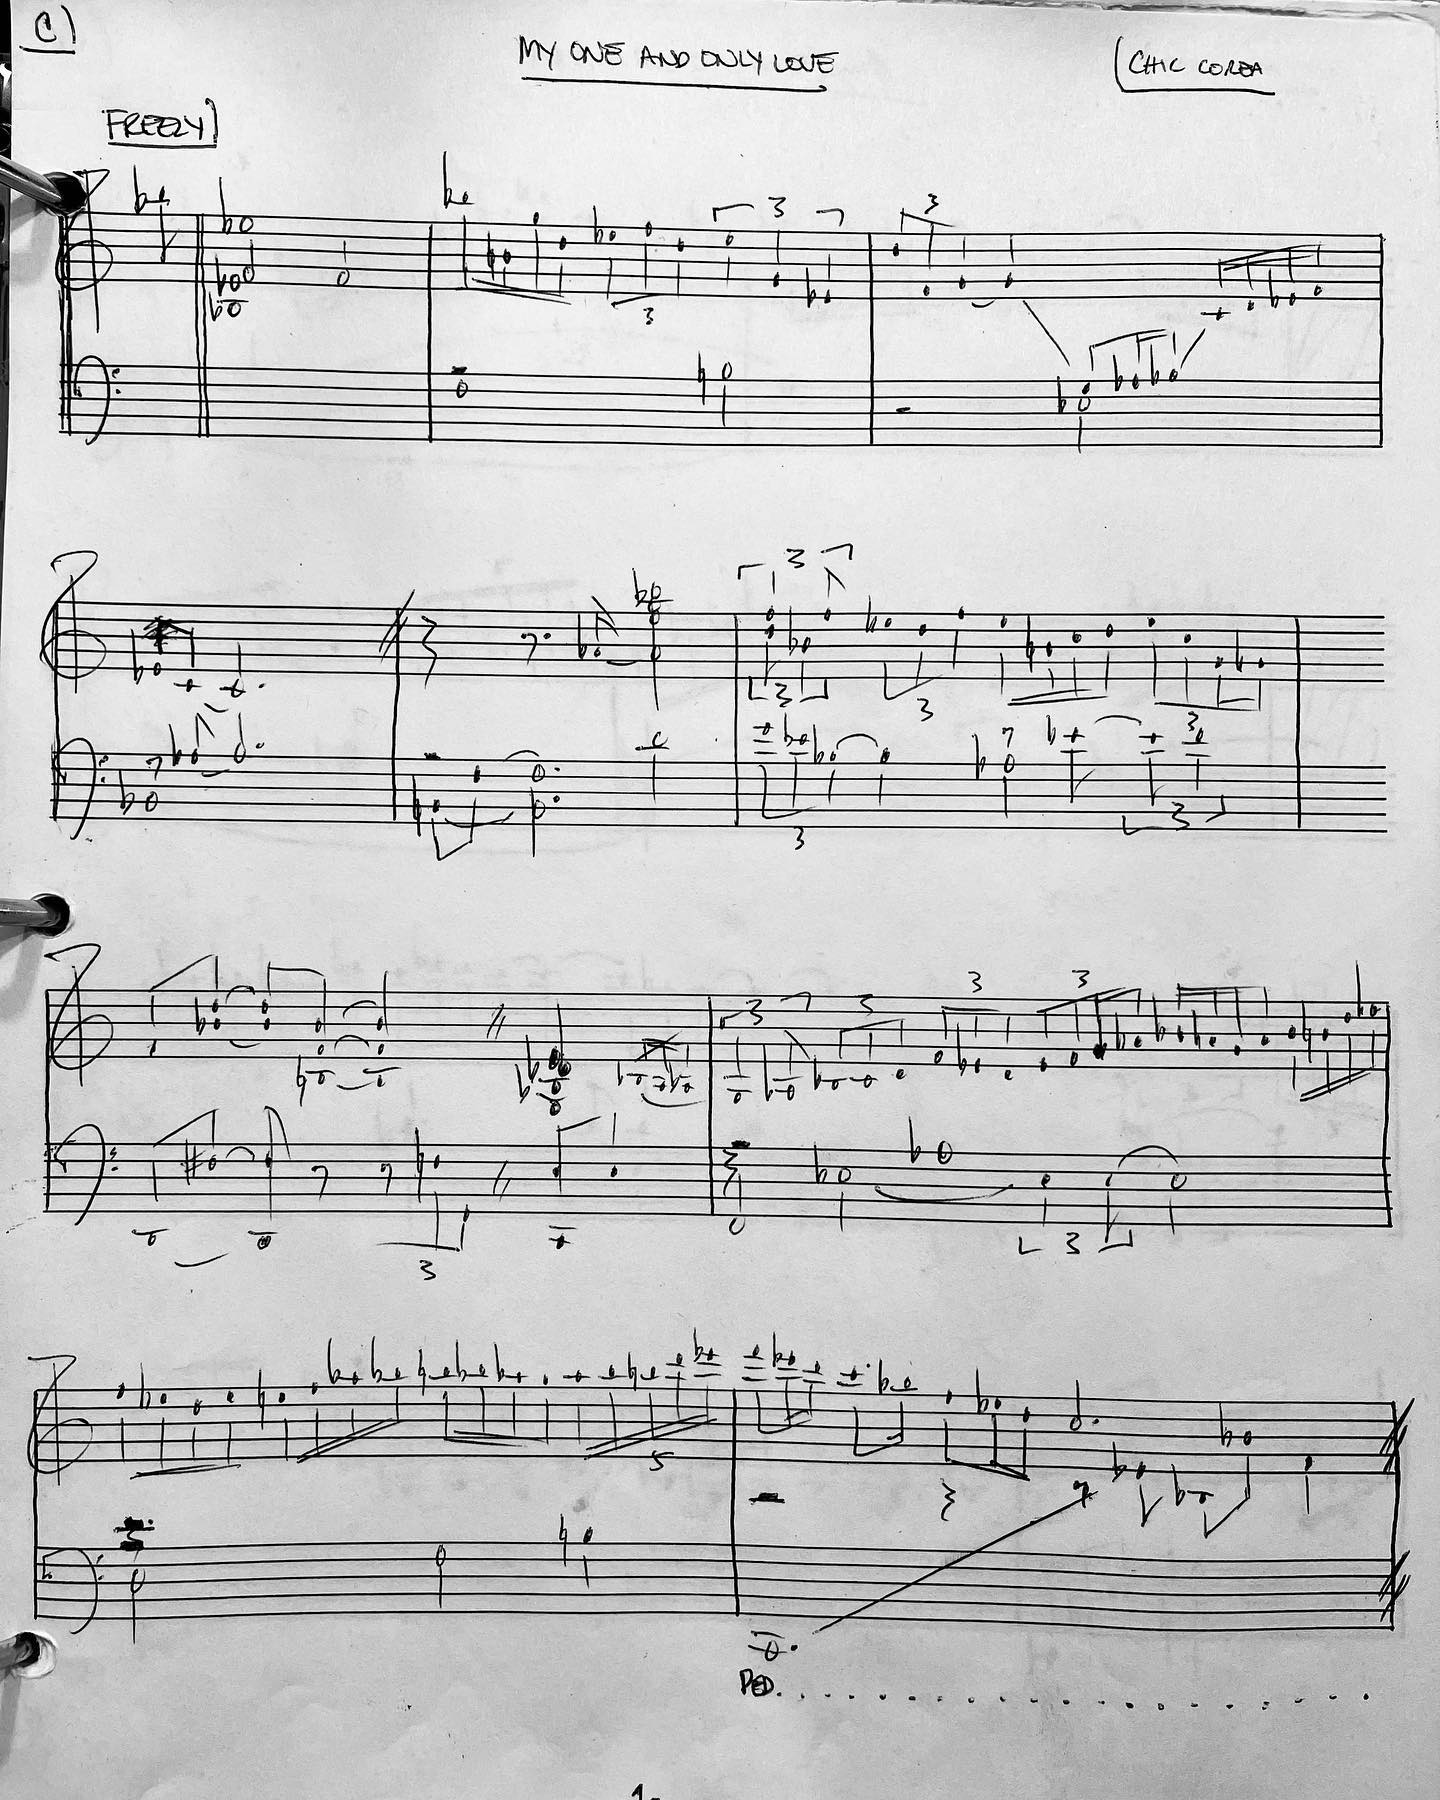 My first Chick Corea transcription. I was probably 19 at the time. I sampled the solo with my Ensoniq EPS sampler and played it down an octave to slow it down for the fast lines. Back then, we didn’t have access to all the tech we have now, but that sampler was transformative.